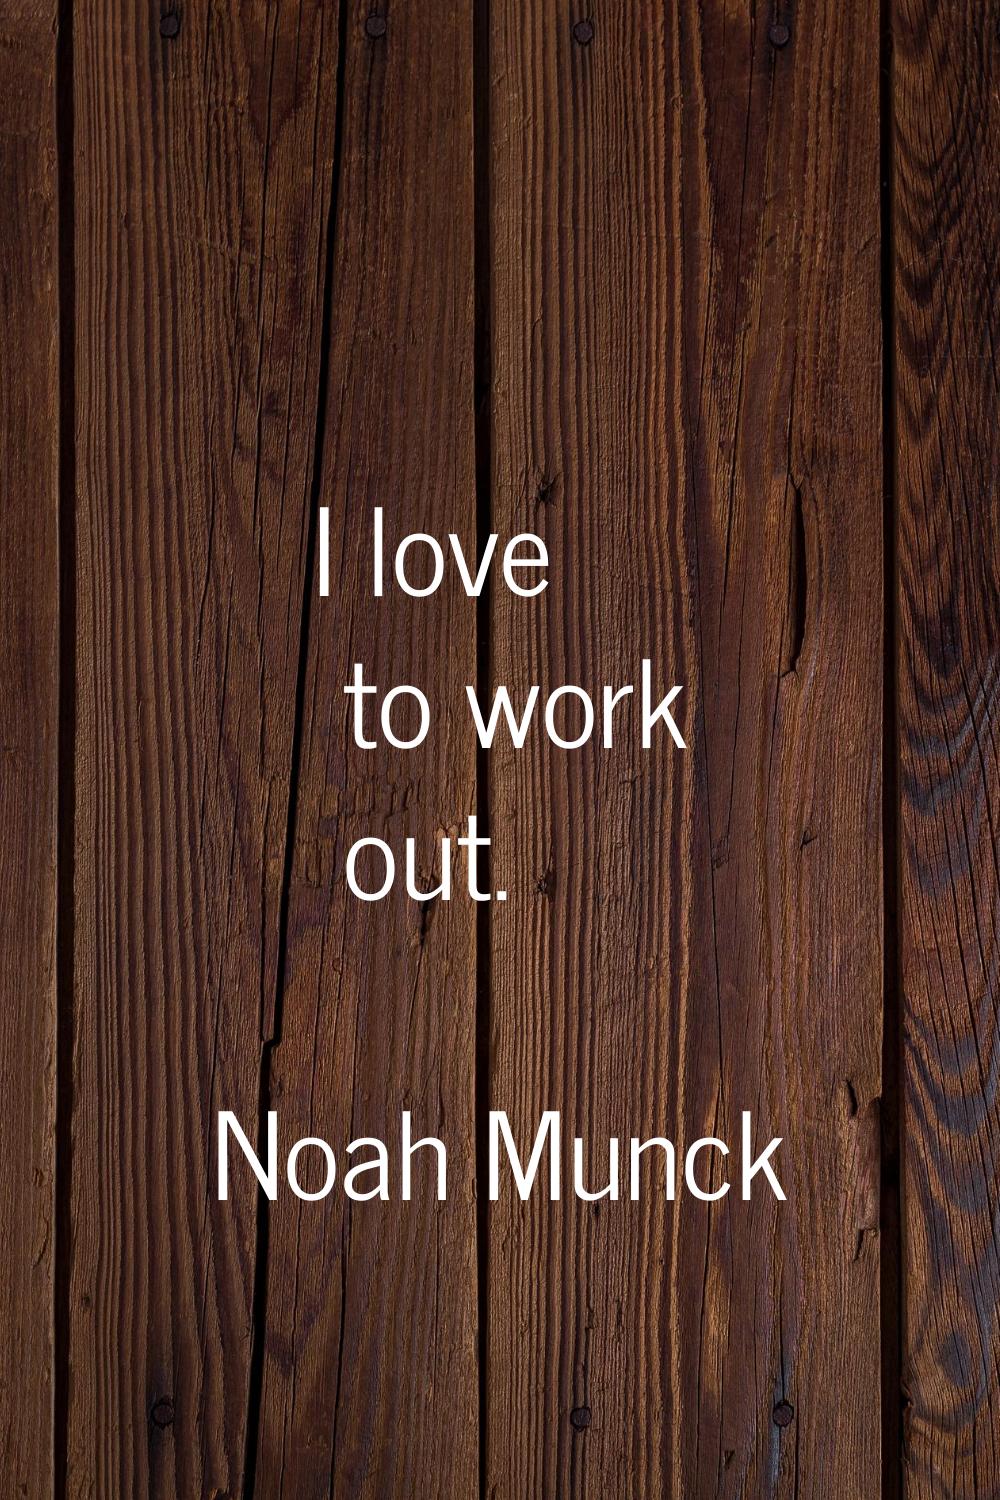 I love to work out.